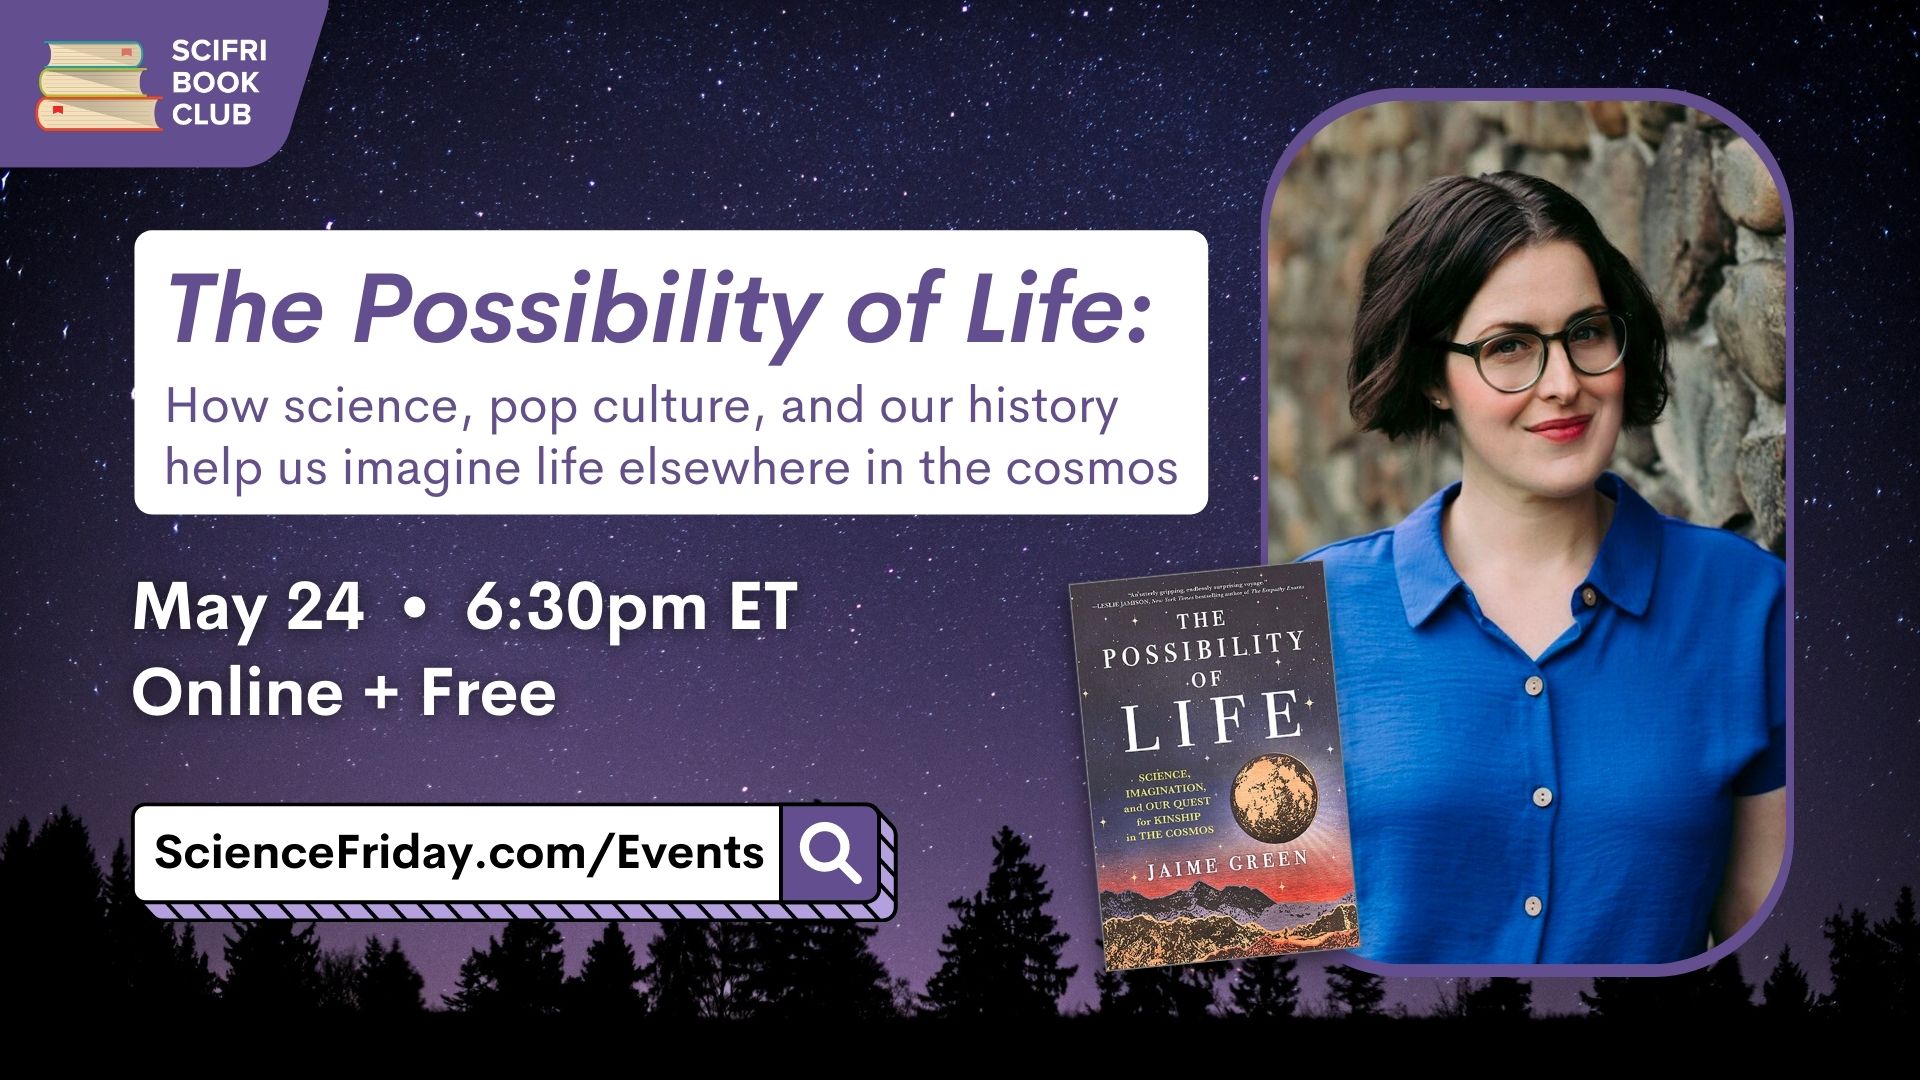 Event promotional image. In top left corner, SciFri Book Club logo, with event info below: The Possibility of Life: How science, pop culture, and our history help us imagine life elsewhere in the cosmos. May 24, 6:30pm ET, Online + Free. To the right of the frame is a picture of THE POSSIBILITY OF LIFE book cover and a headshot of author Jaime Green